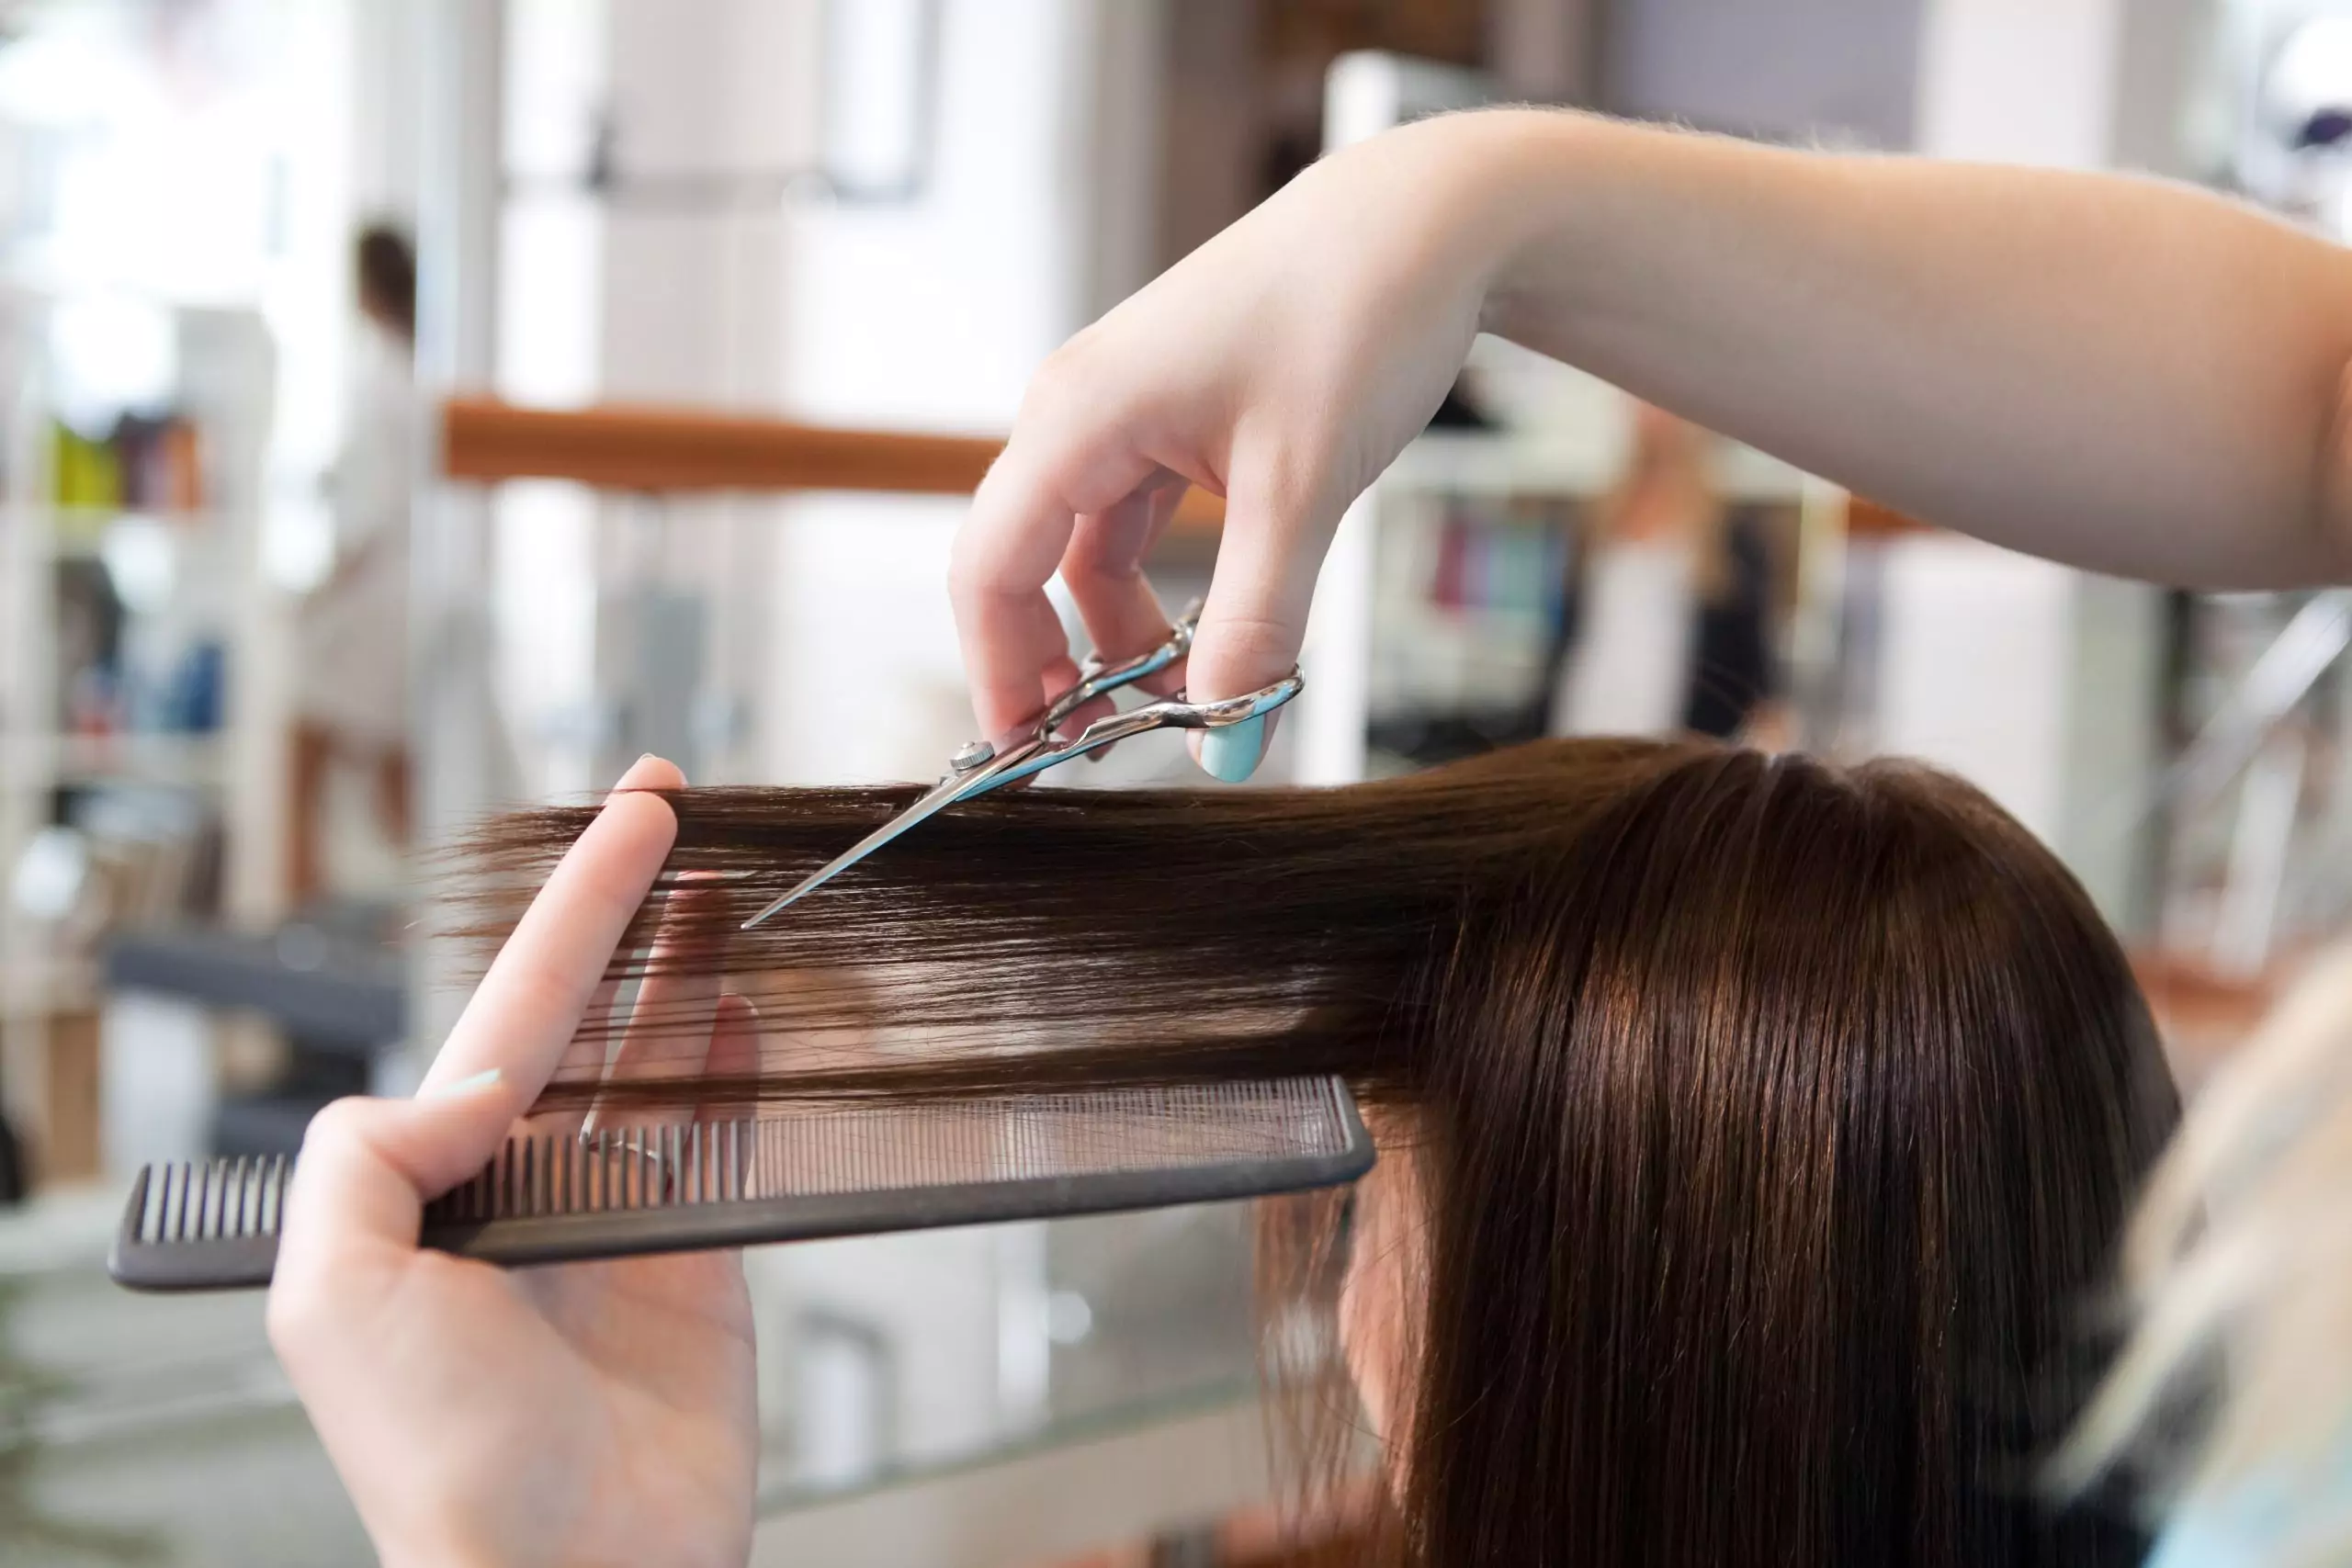 The Complete Guide on How and Where to Donate Your Hair - GenTwenty